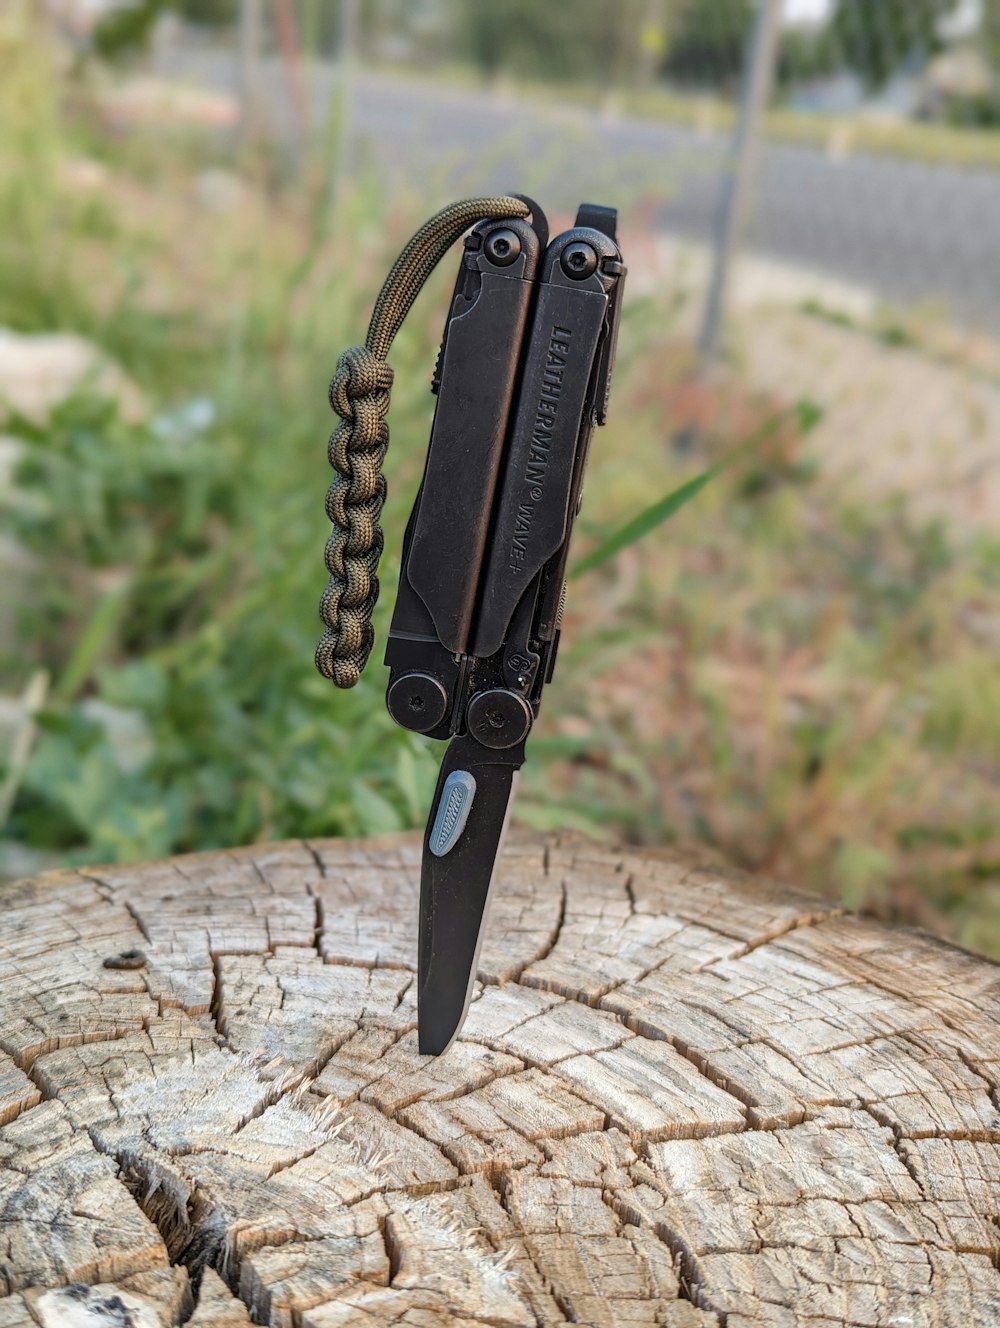 a knife with a chain attached to it sitting on a piece of wood